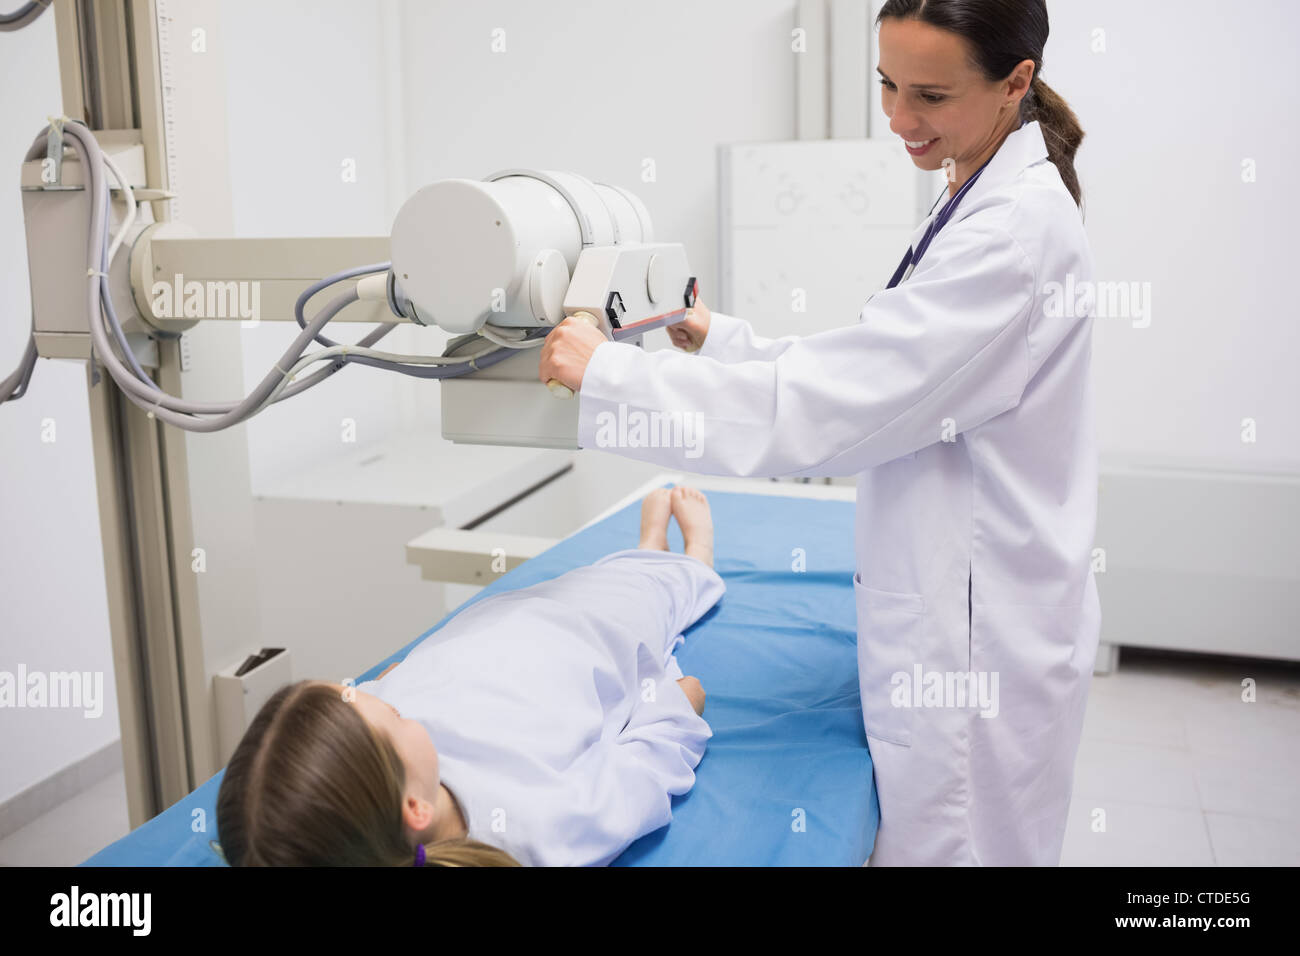 Female doctor holding a radiography machine over a patient Stock Photo